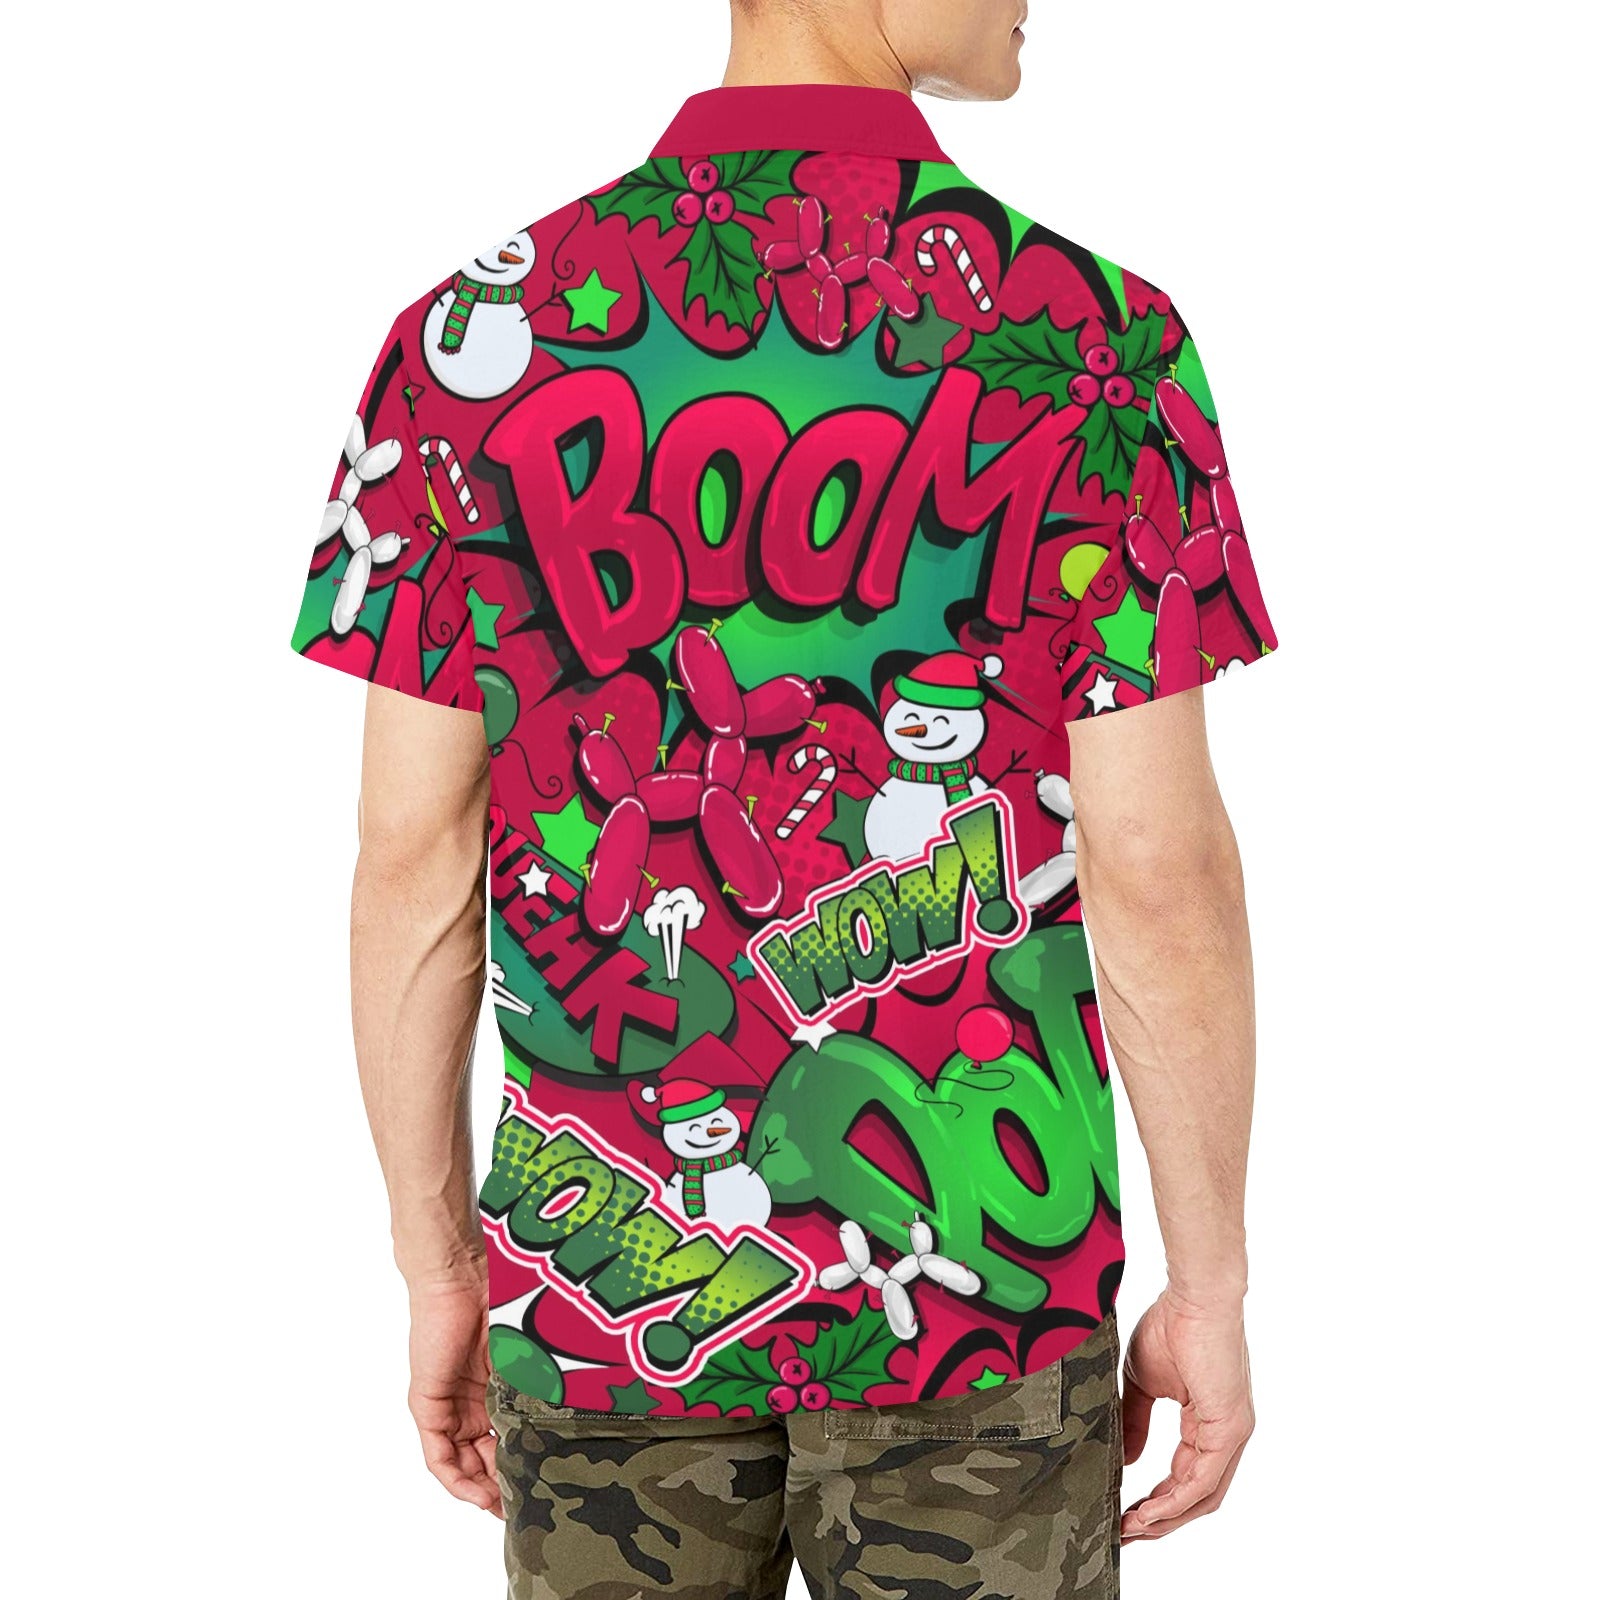 Christmas shirt for face painters, balloon artists and entertainers